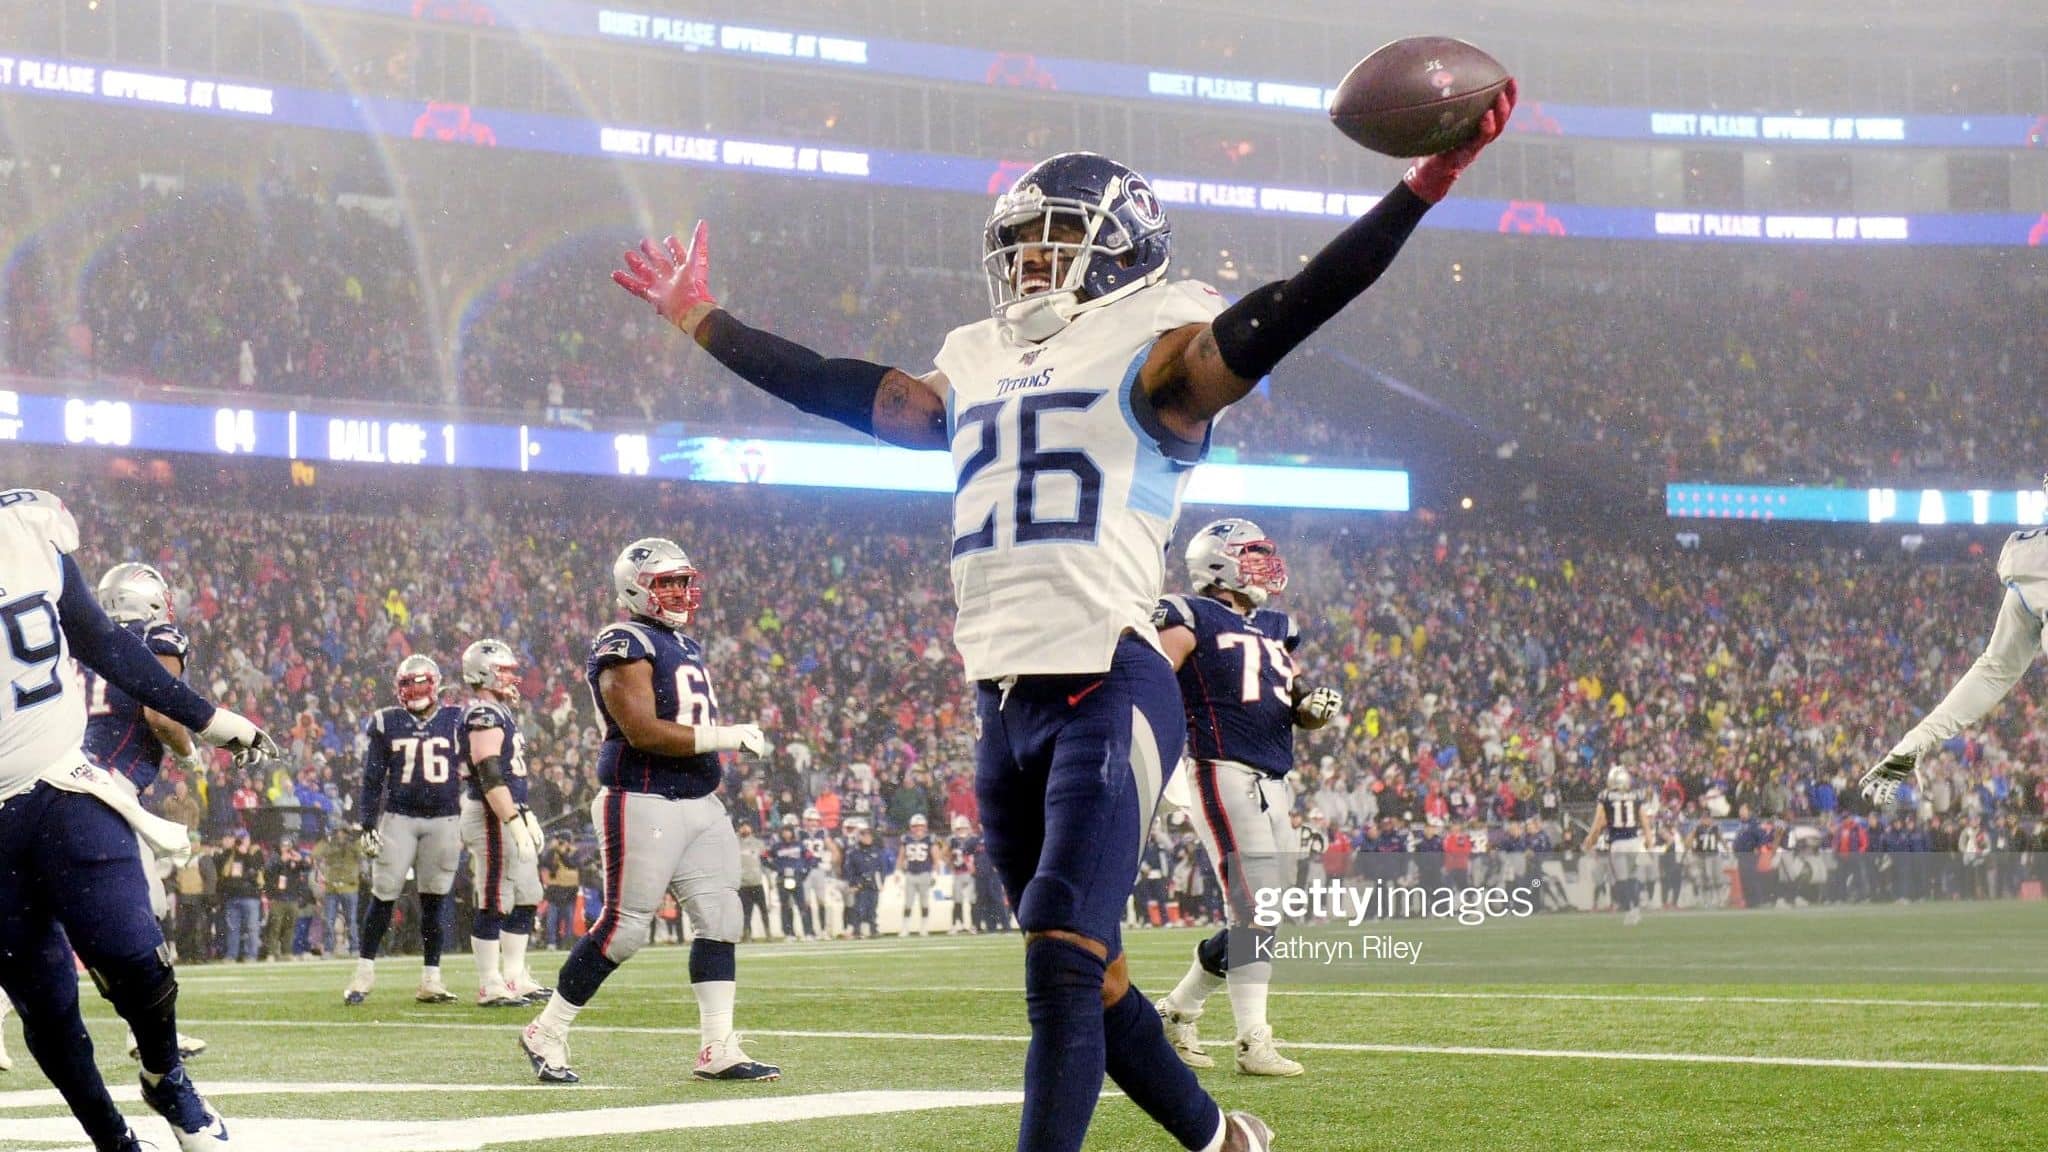 FOXBOROUGH, MASSACHUSETTS - JANUARY 04: Logan Ryan #26 of the Tennessee Titans scores a touchdown against the New England Patriots in the fourth quarter of the AFC Wild Card Playoff game at Gillette Stadium on January 04, 2020 in Foxborough, Massachusetts.